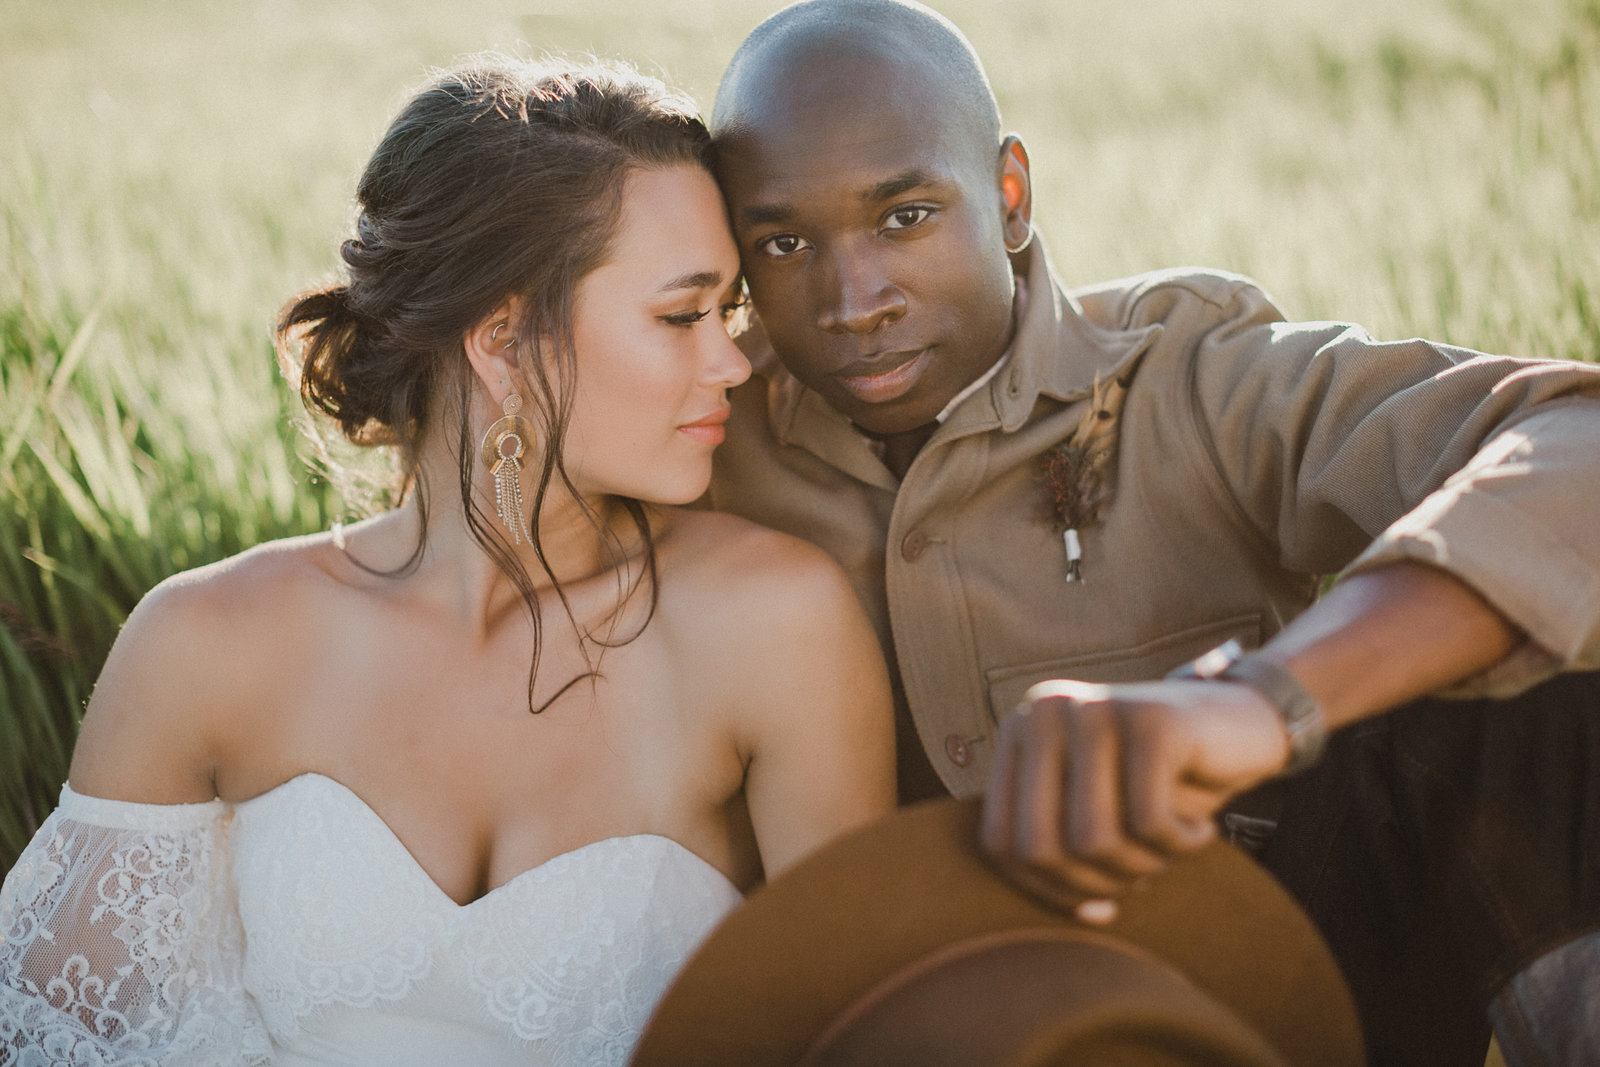 Indie inspired styled wedding elopement shot in Montana, photographed by Sweetwater.